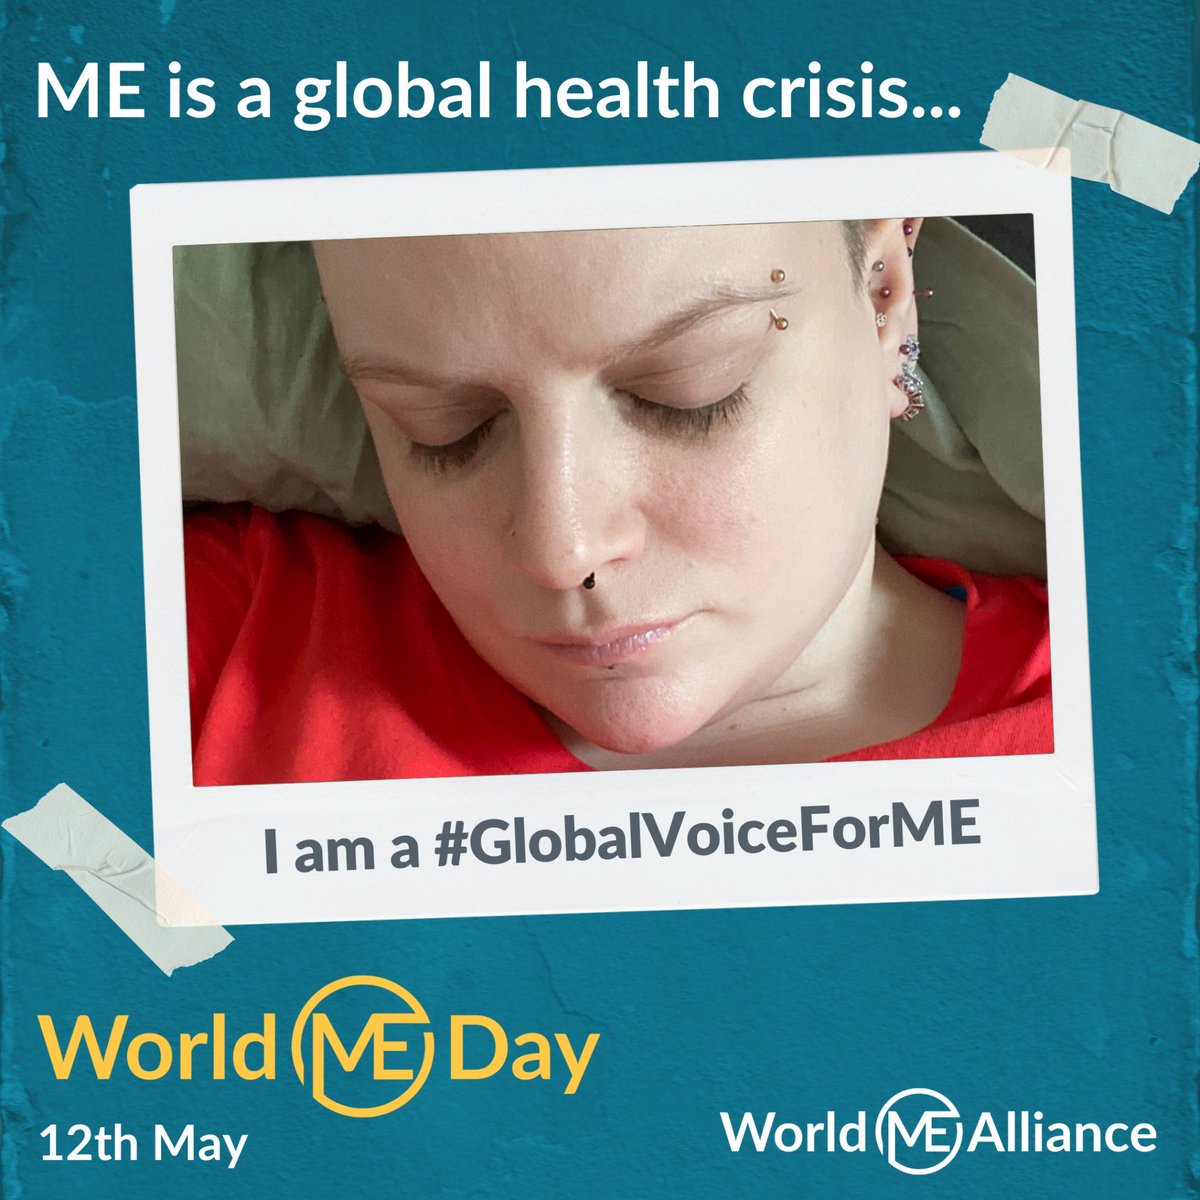 #MEawarenessDay #MEawarenessWeek #MEawarenessMonth #MEnotCFS #WorldMEday #GlobalVoiceForME 💙 ME is a global health crisis... I have been suffering with ME for over 24 years. It has stolen any chance of life I had(I was 14 when diagnosed). The way #PwME are treated is a scandal!